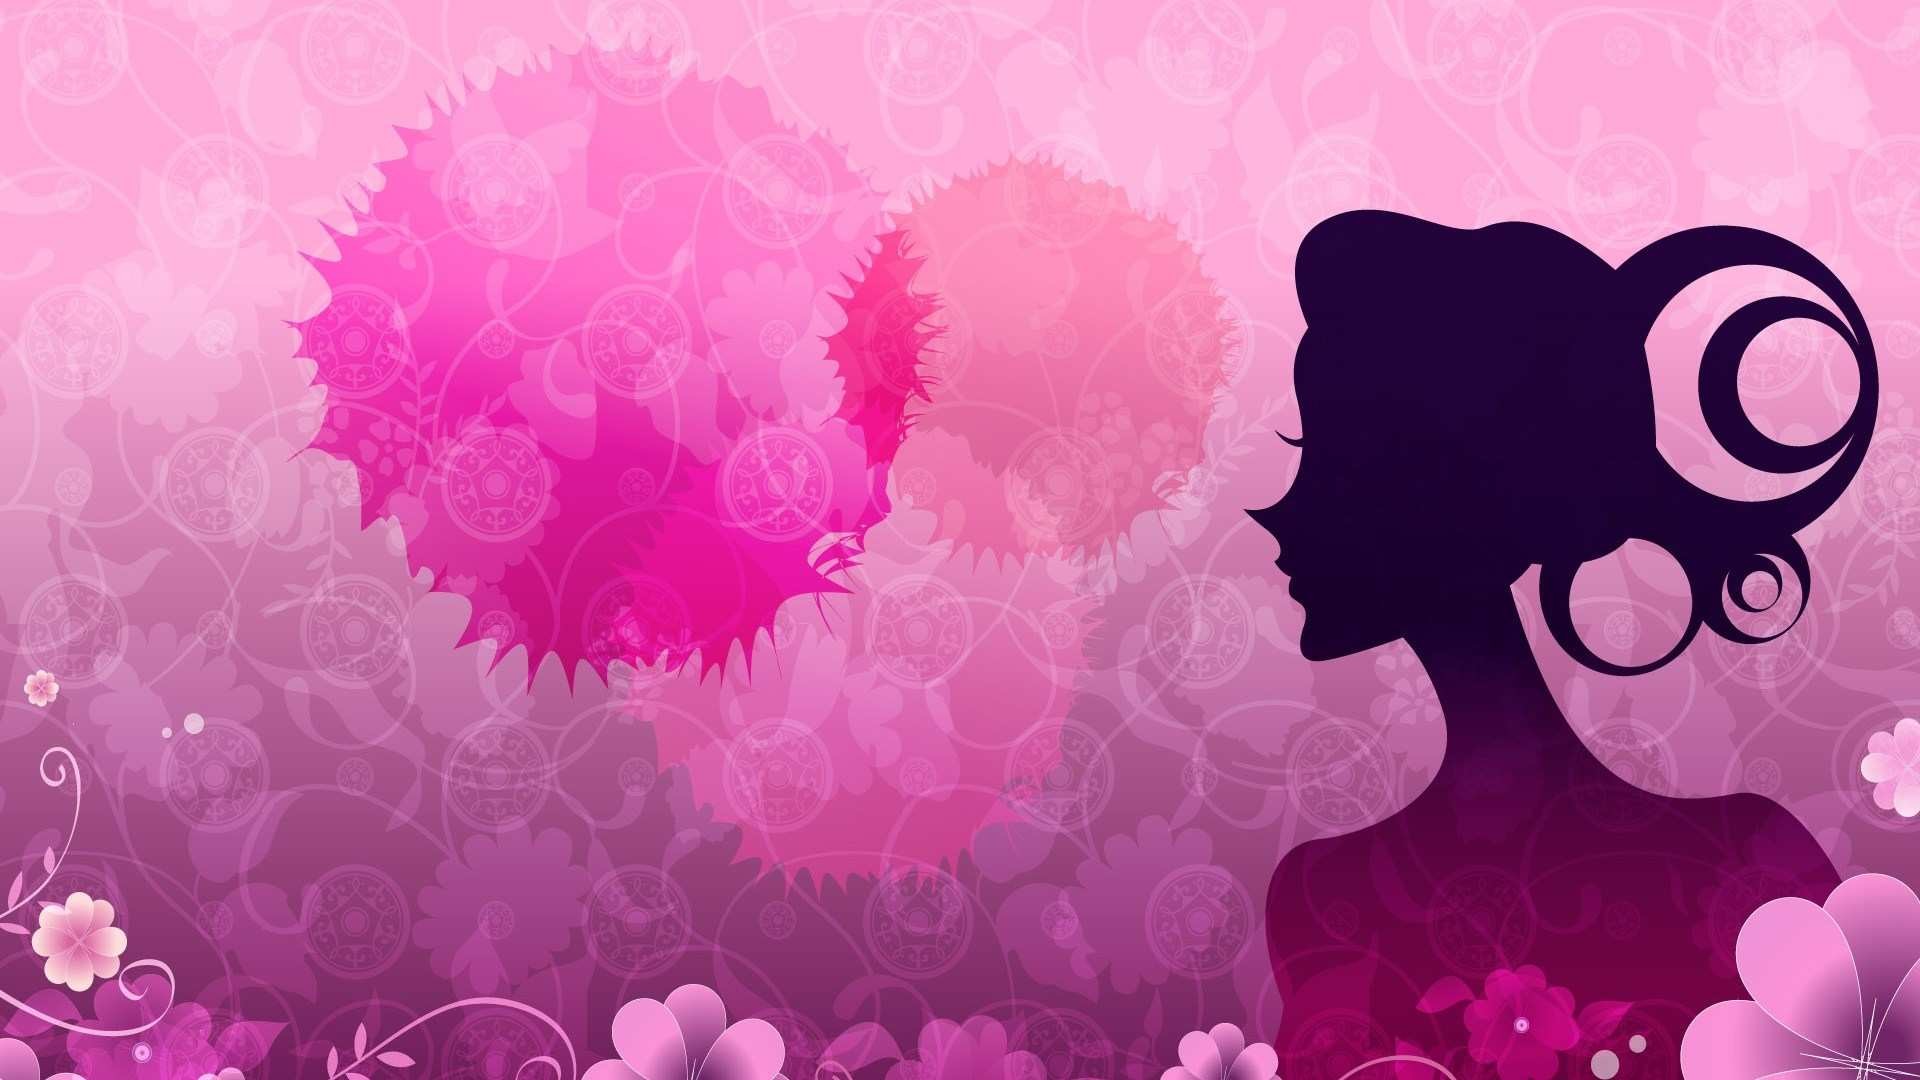 1920x1080 Girls Wallpapers Girly Cute Backgrounds HD Pink